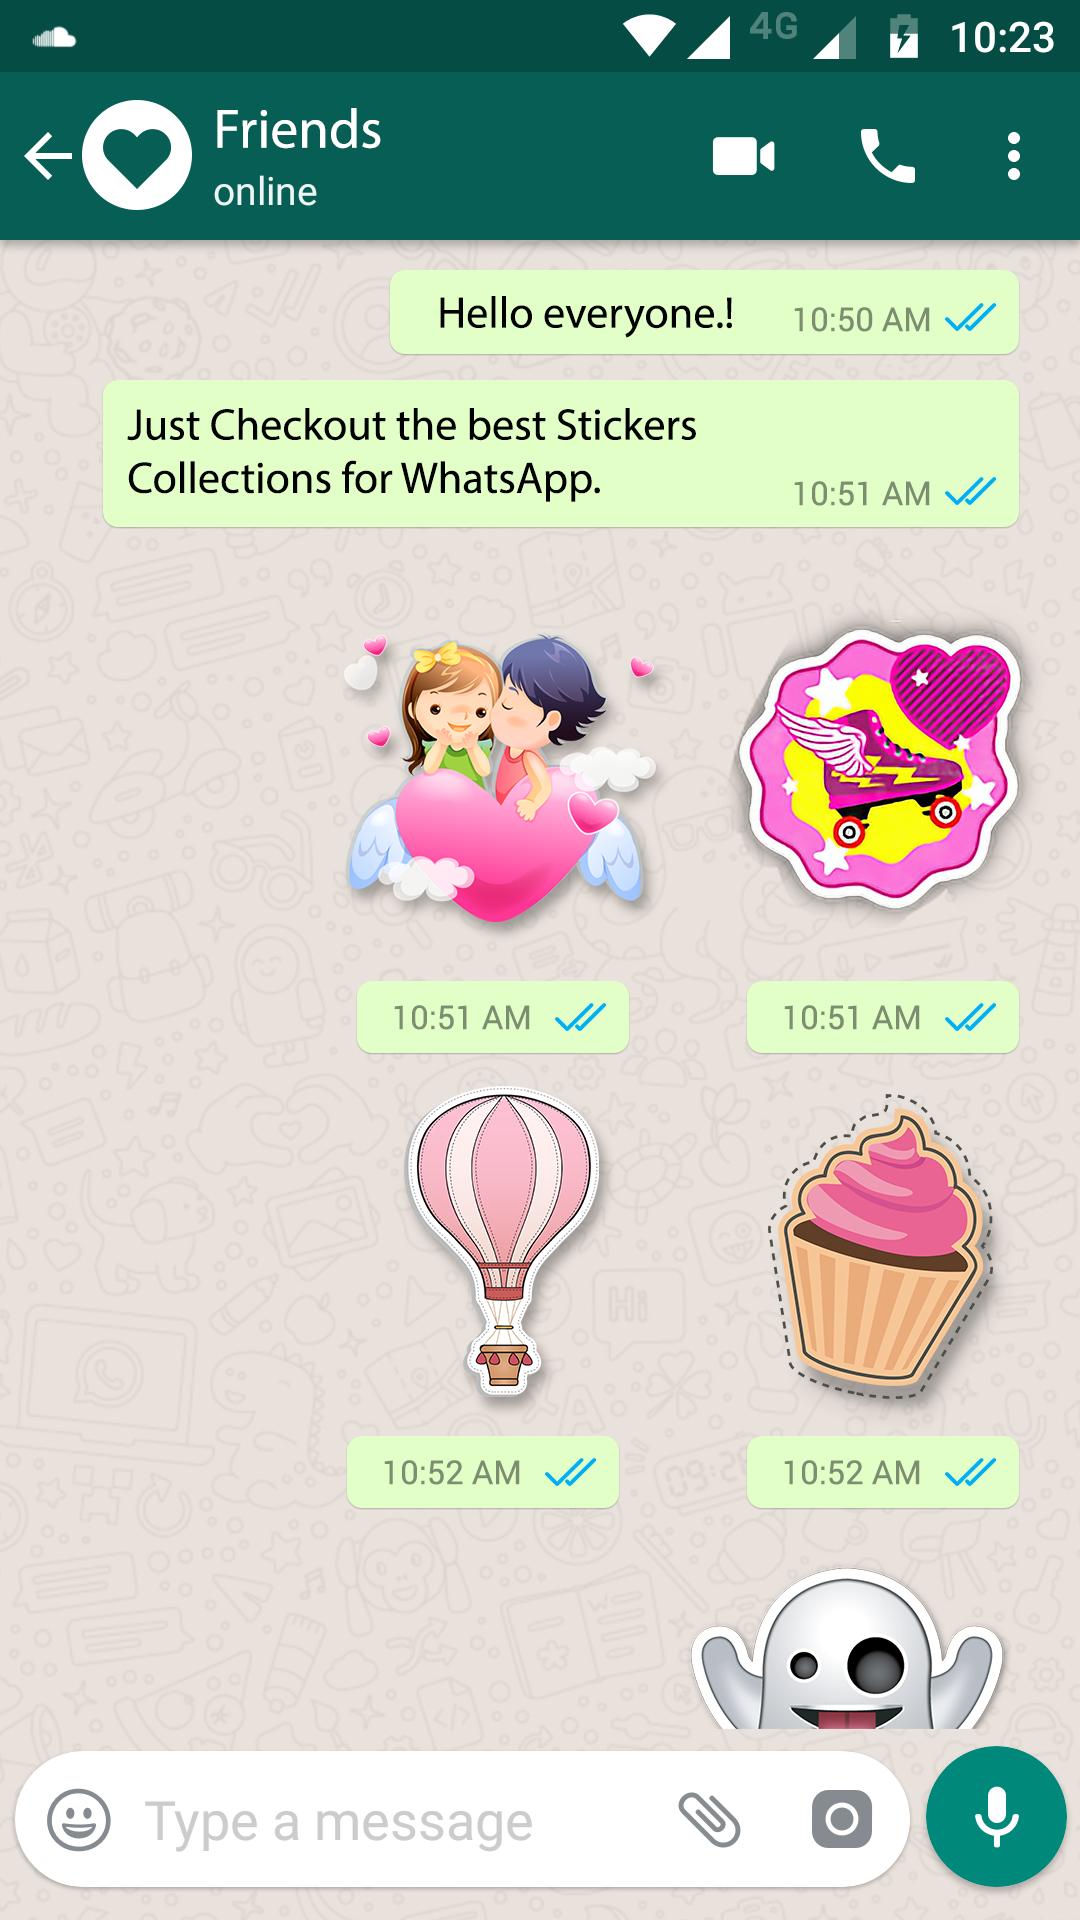 Malayalam Stickers Packs For Whatsapp 2019 For Android Apk Download